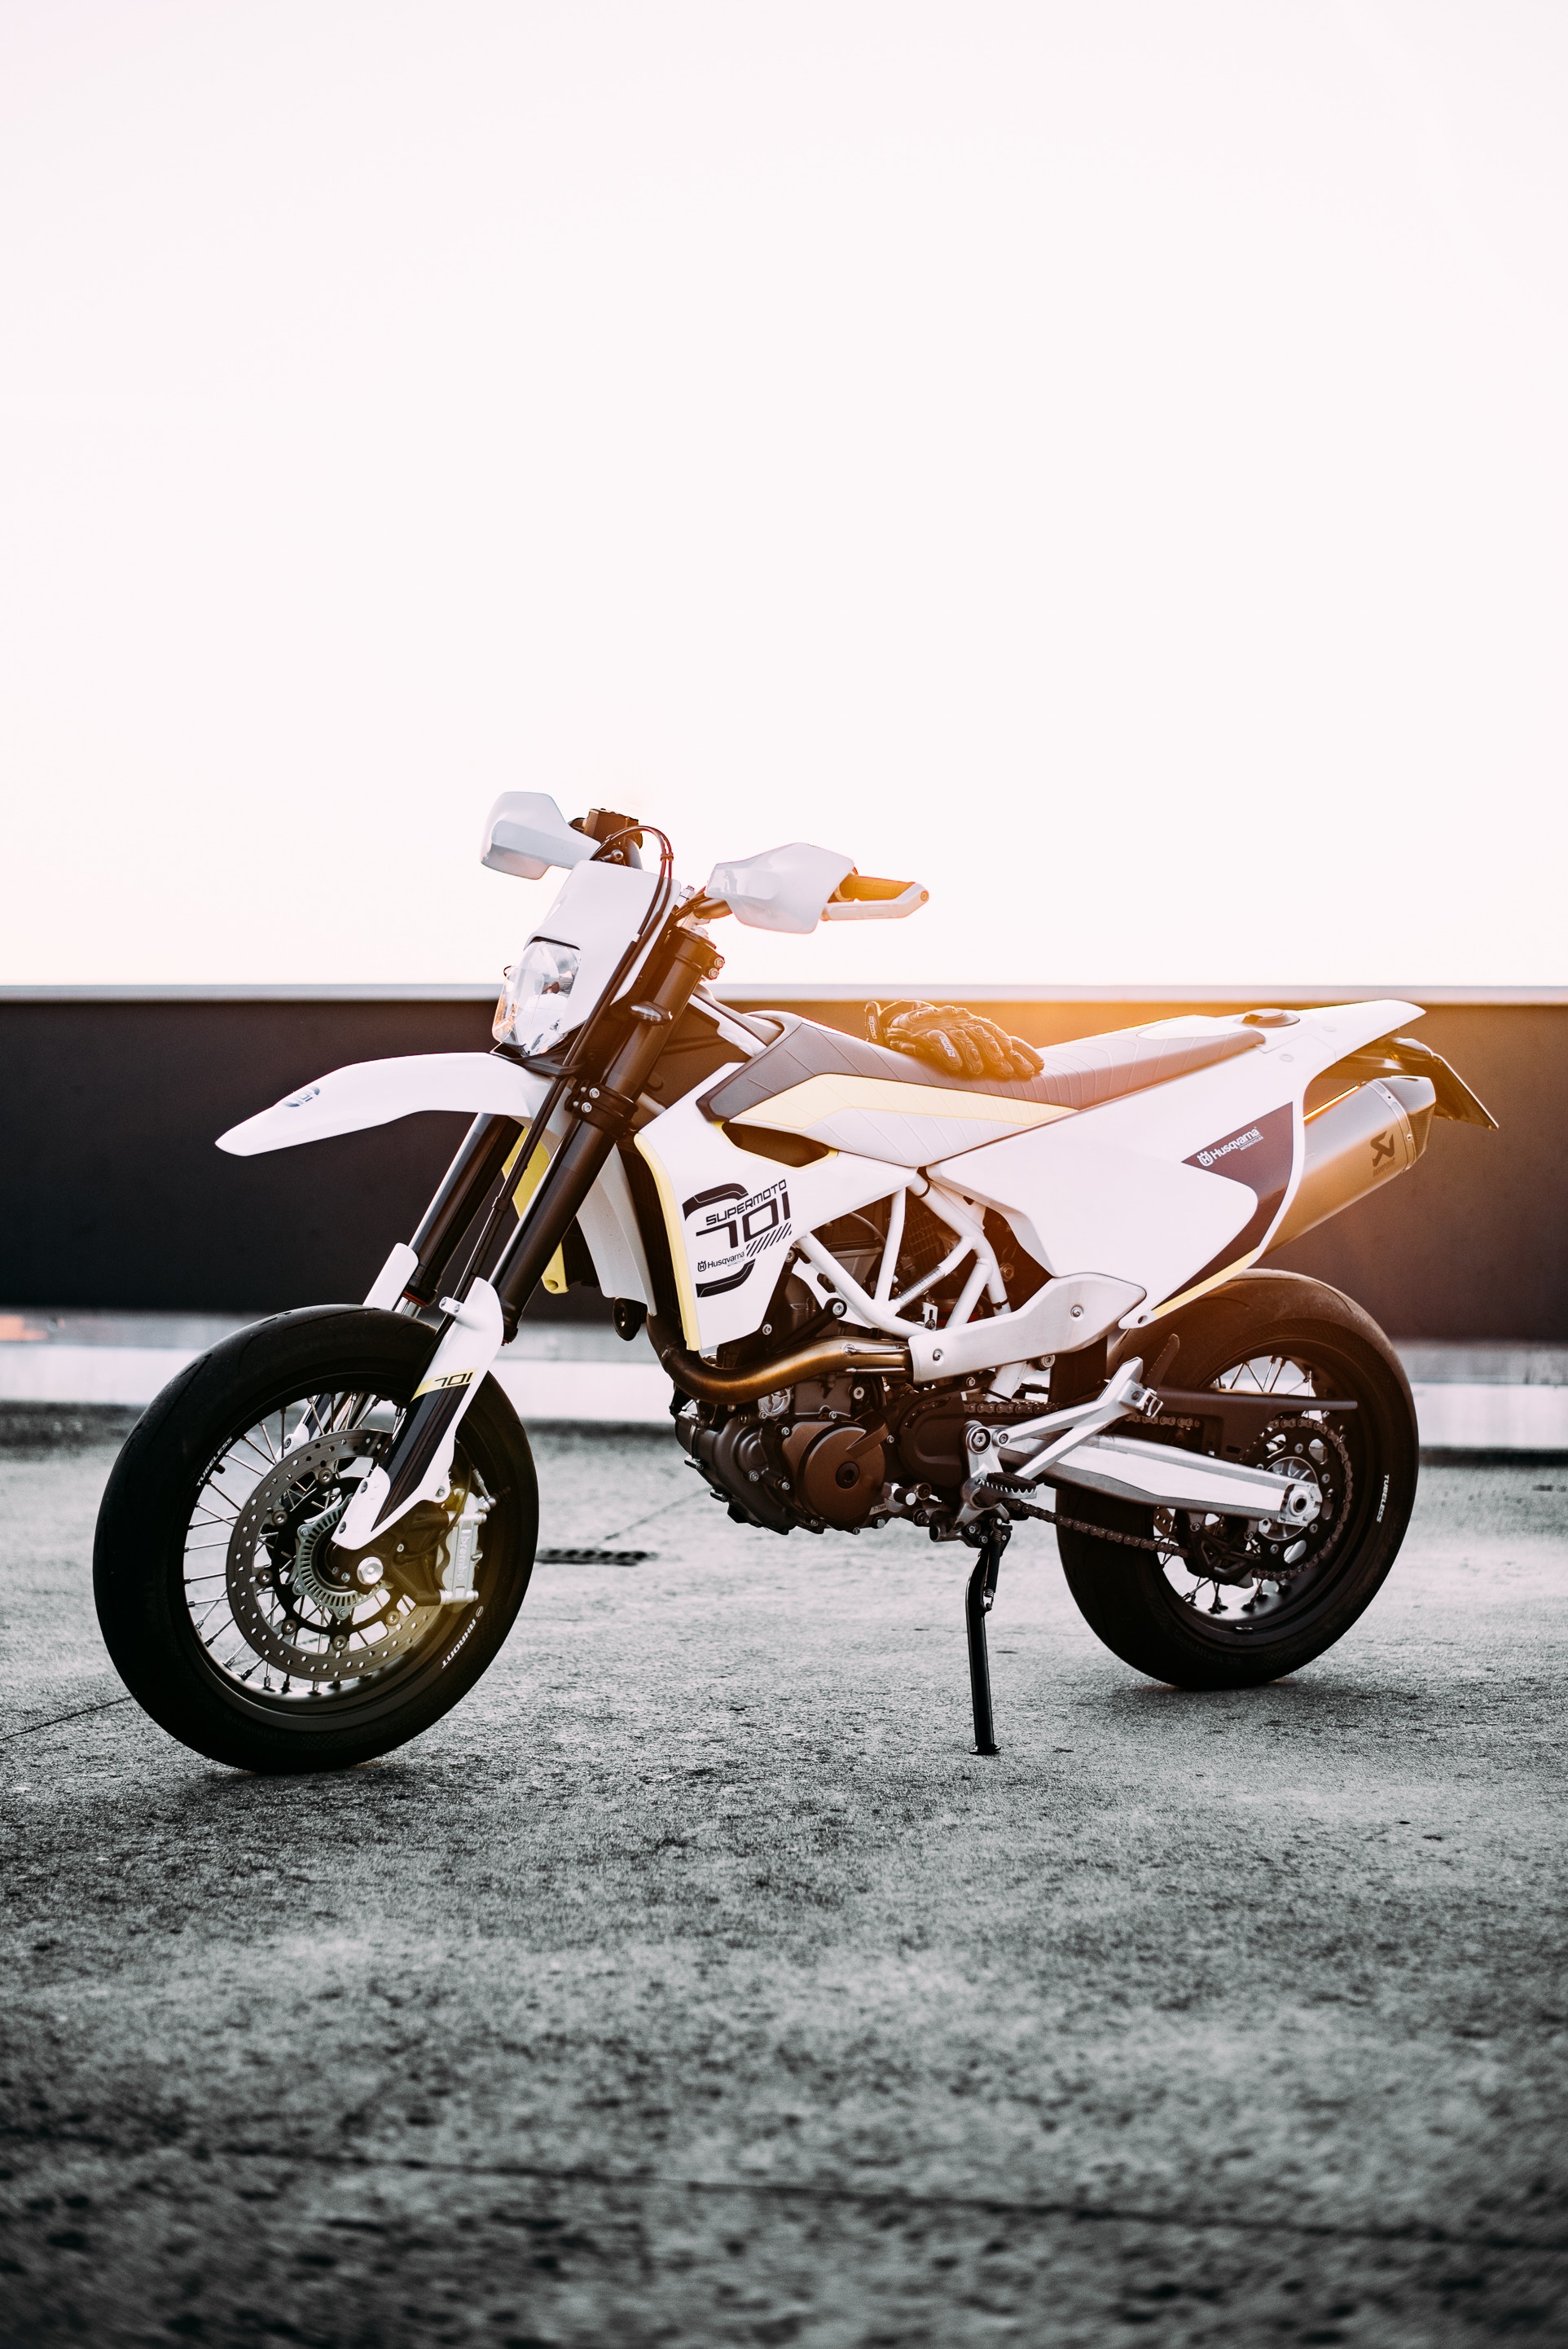 Free HD side view, motorcycles, white, motorcycle